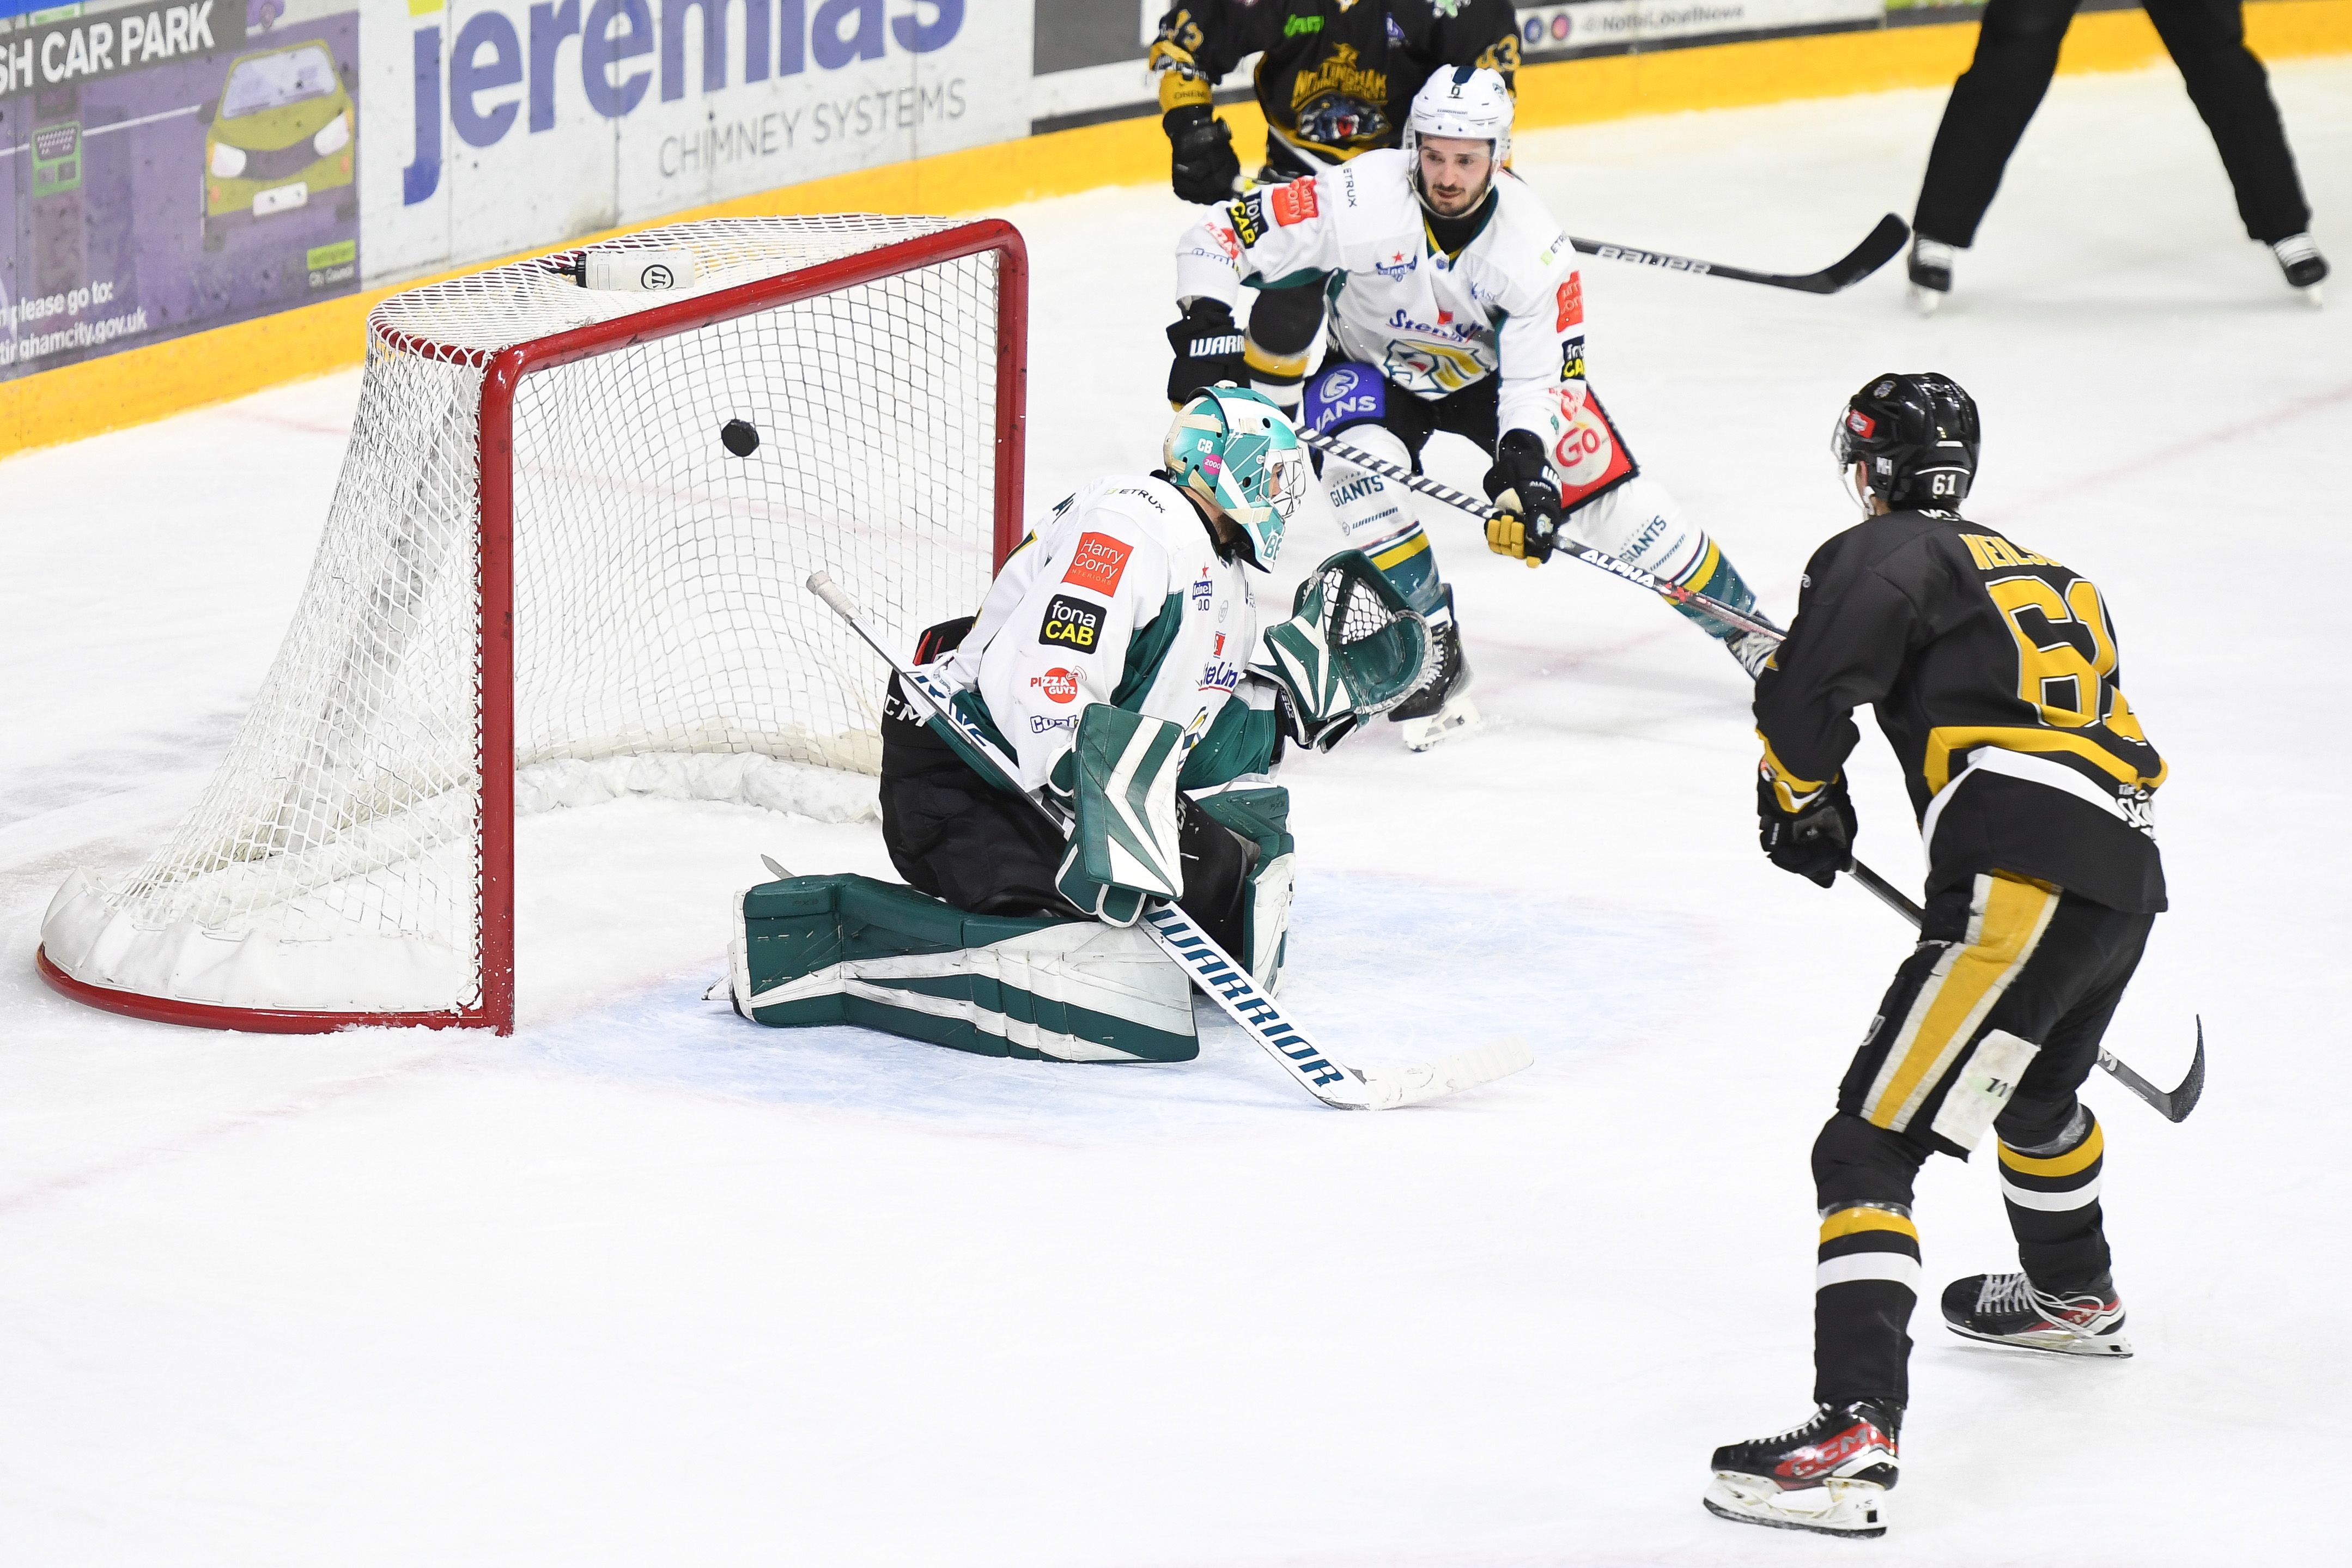 25TH FEBRUARY 2024: PANTHERS 5-1 GIANTS Top Image